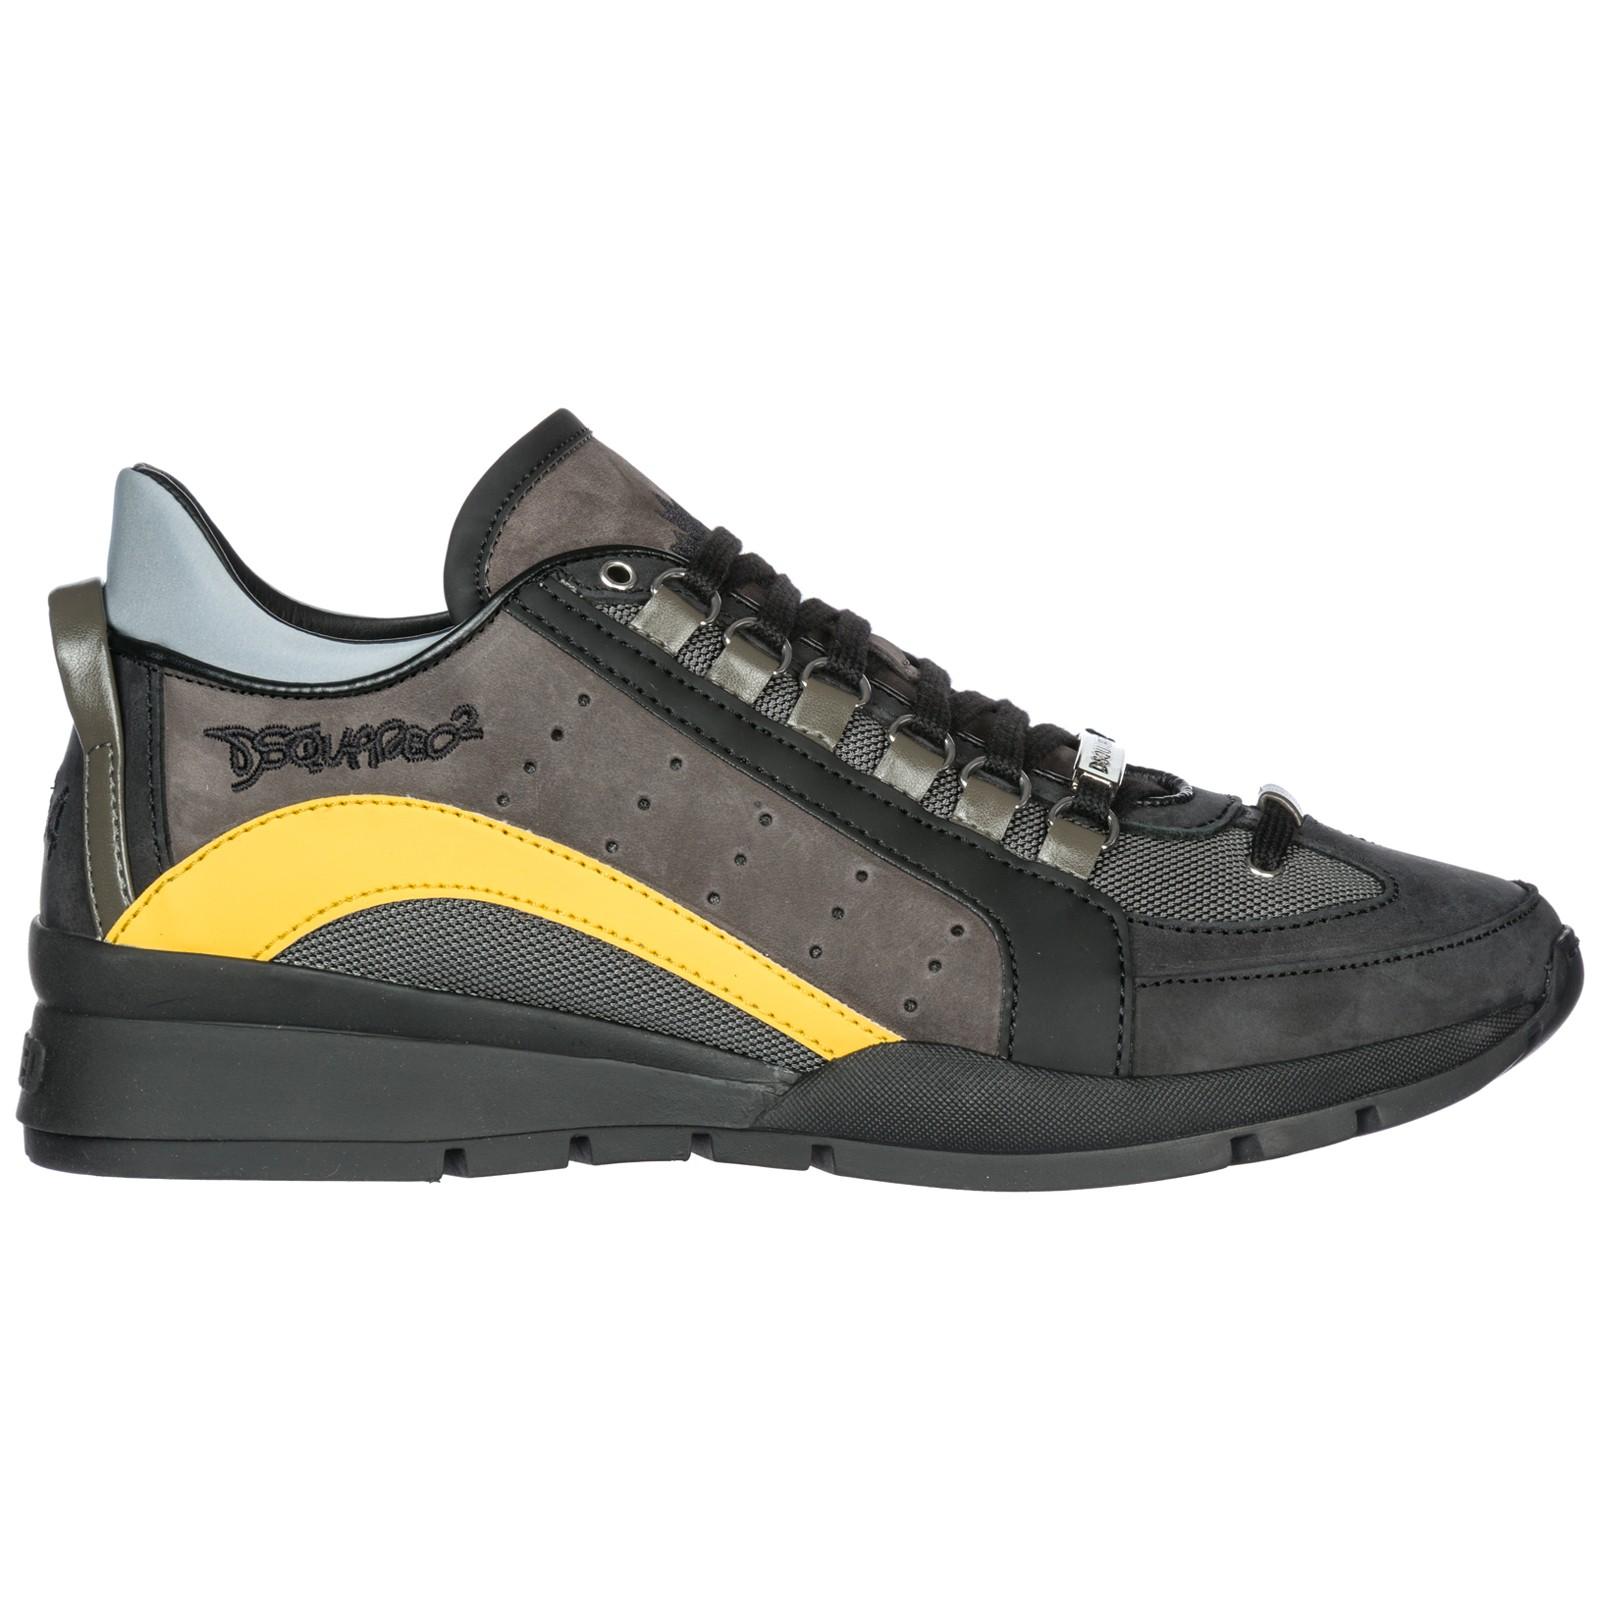 dsquared 551 sneakers black